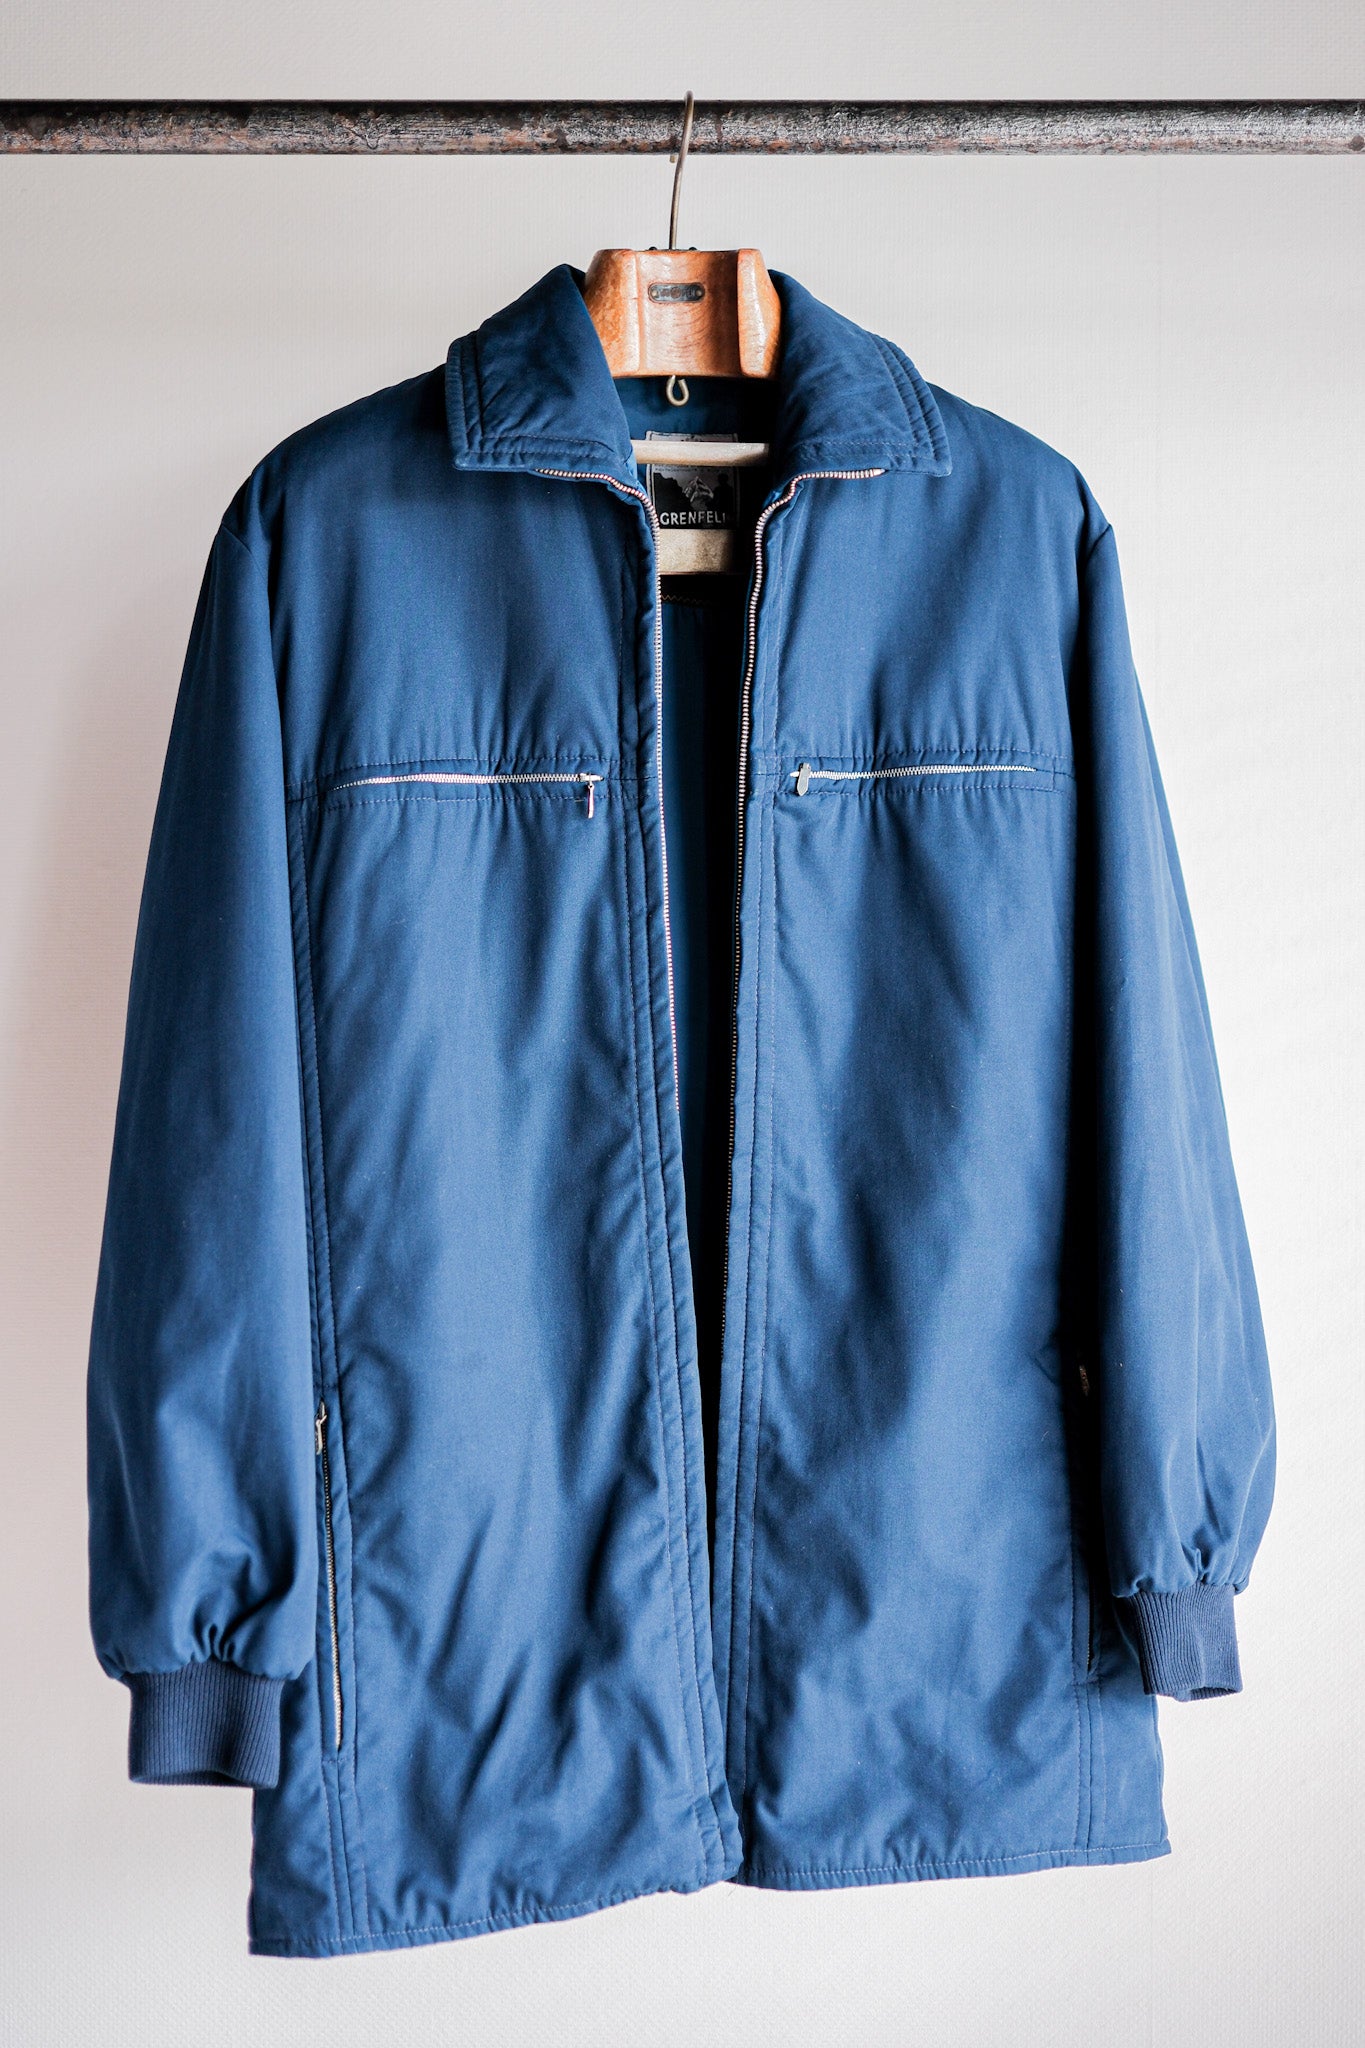 [~ 70's] Vintage Grenfell Outdoor Jacket "Mountain Tag"